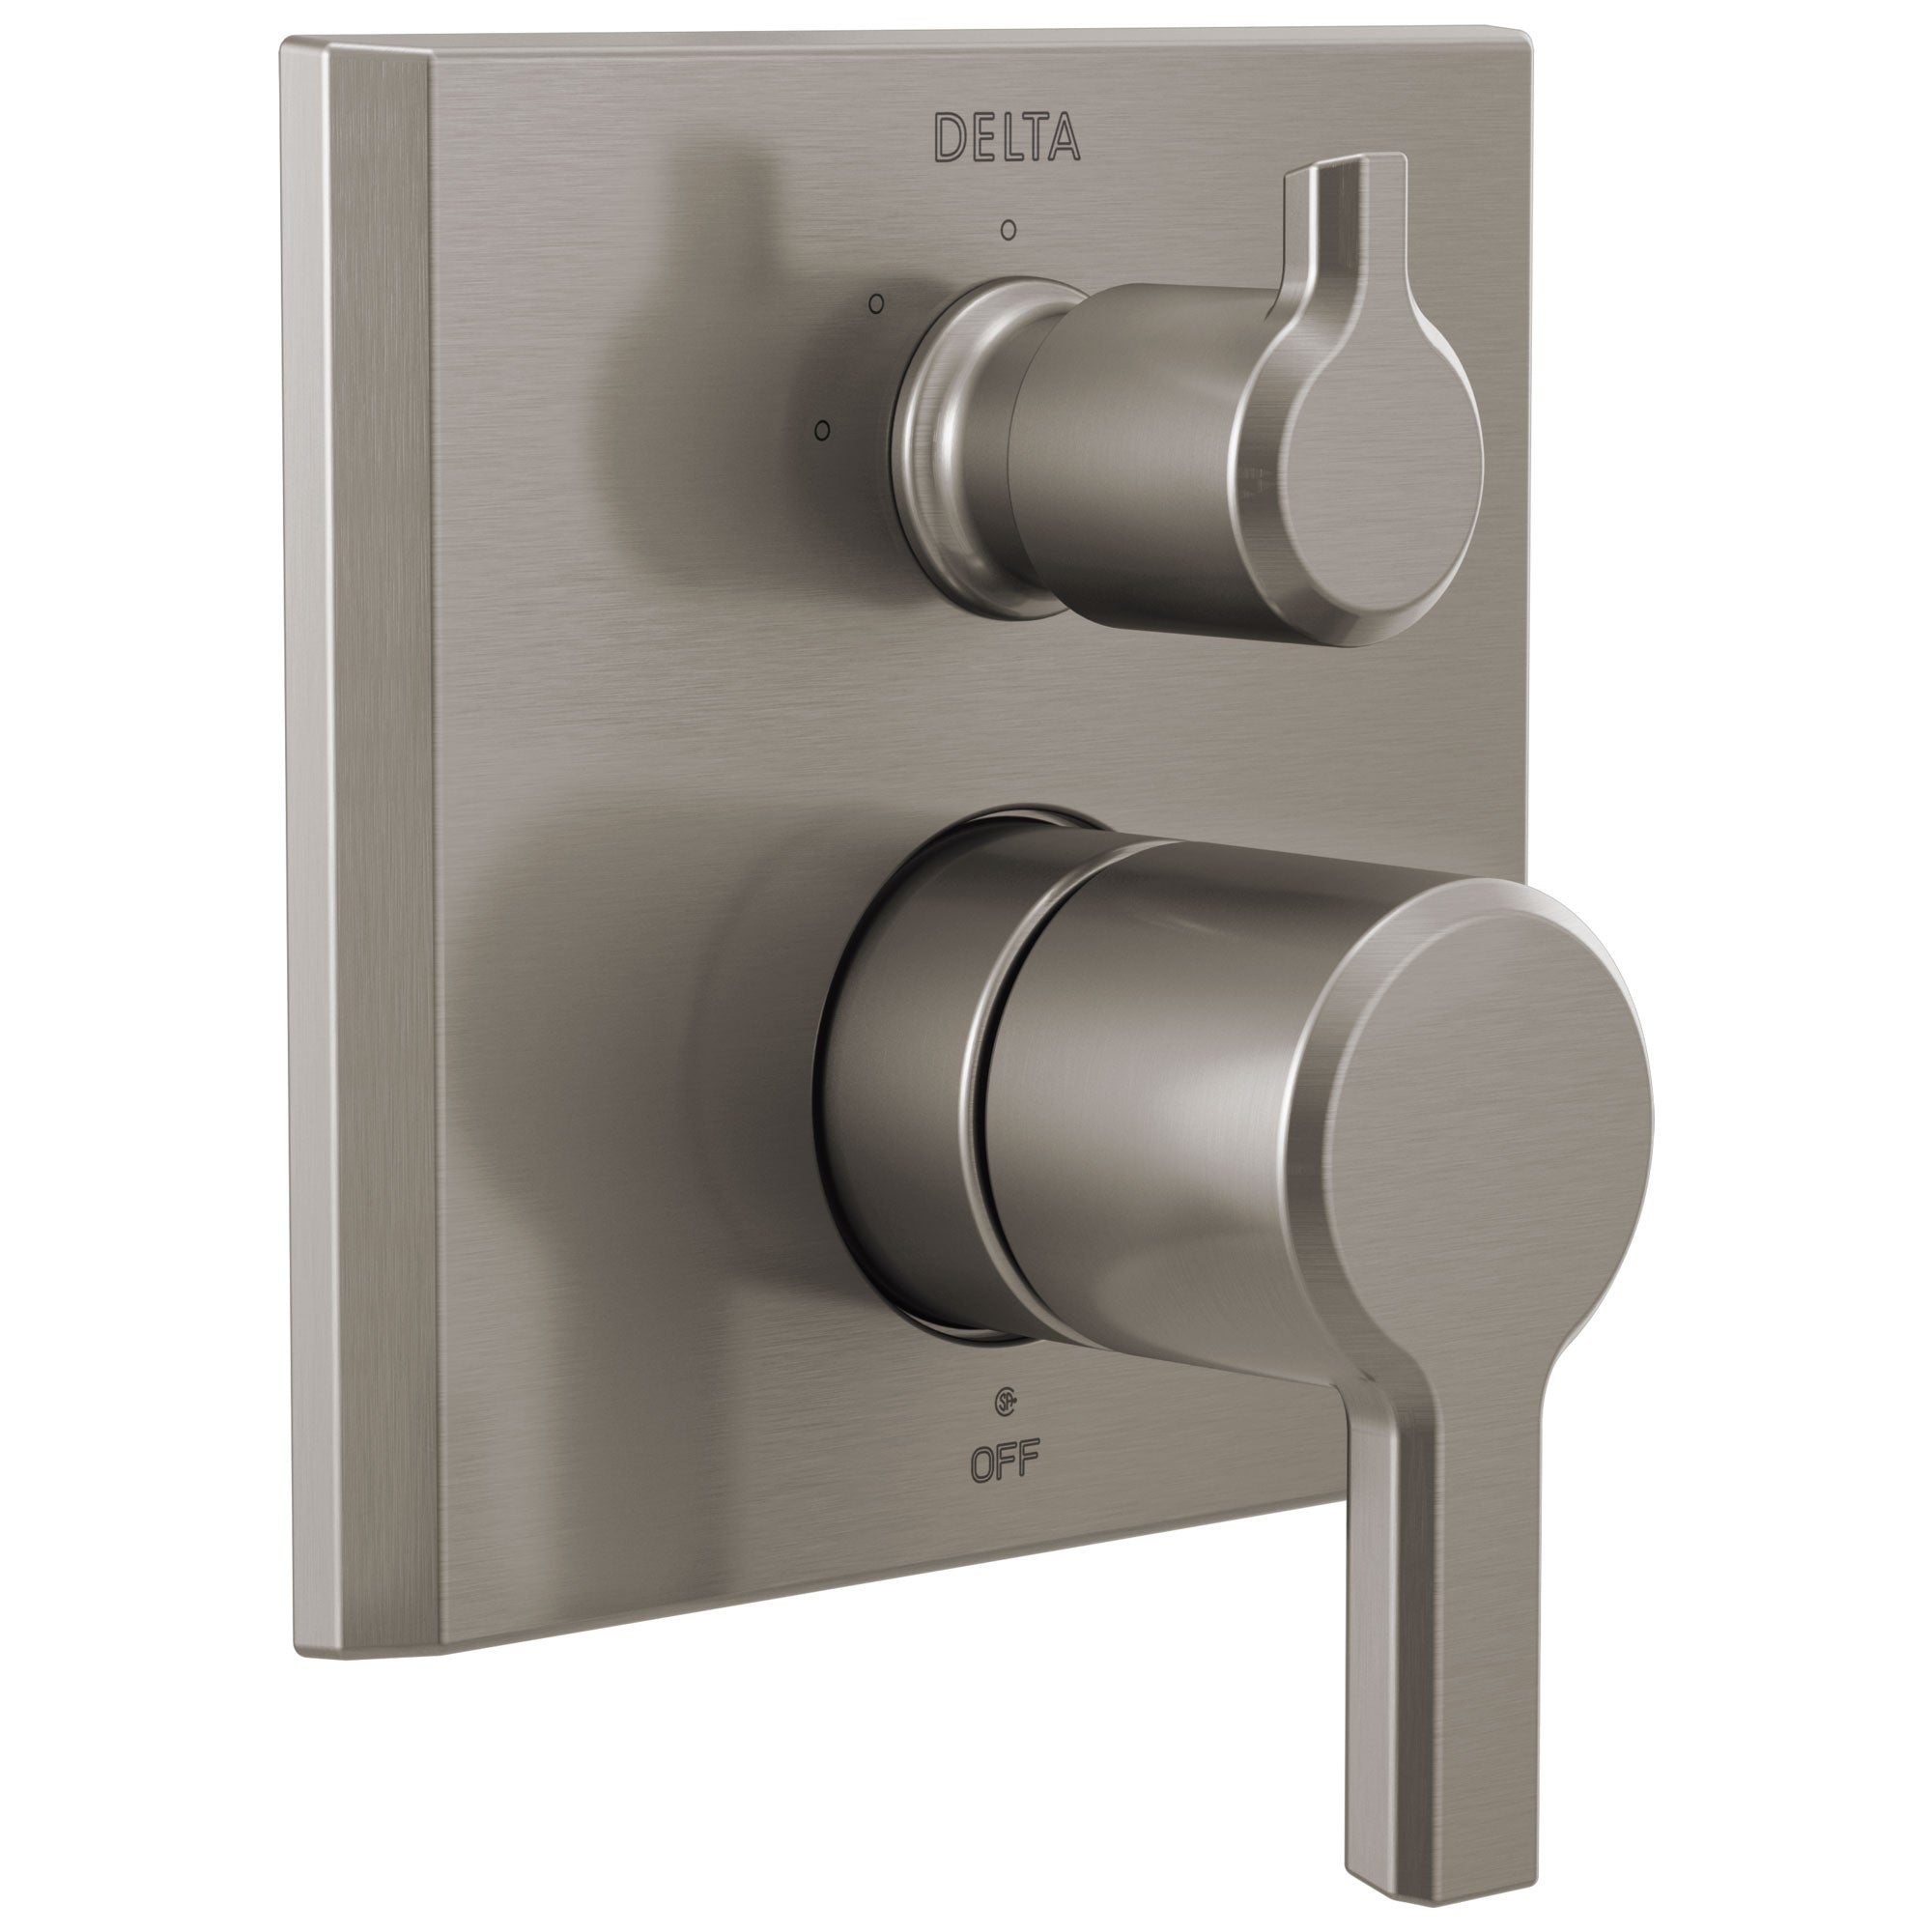 Delta Pivotal Stainless Steel Finish 2-Handle Monitor 14 Series Shower Control Trim Kit with 3-Setting Integrated Diverter (Requires Valve) DT24899SS